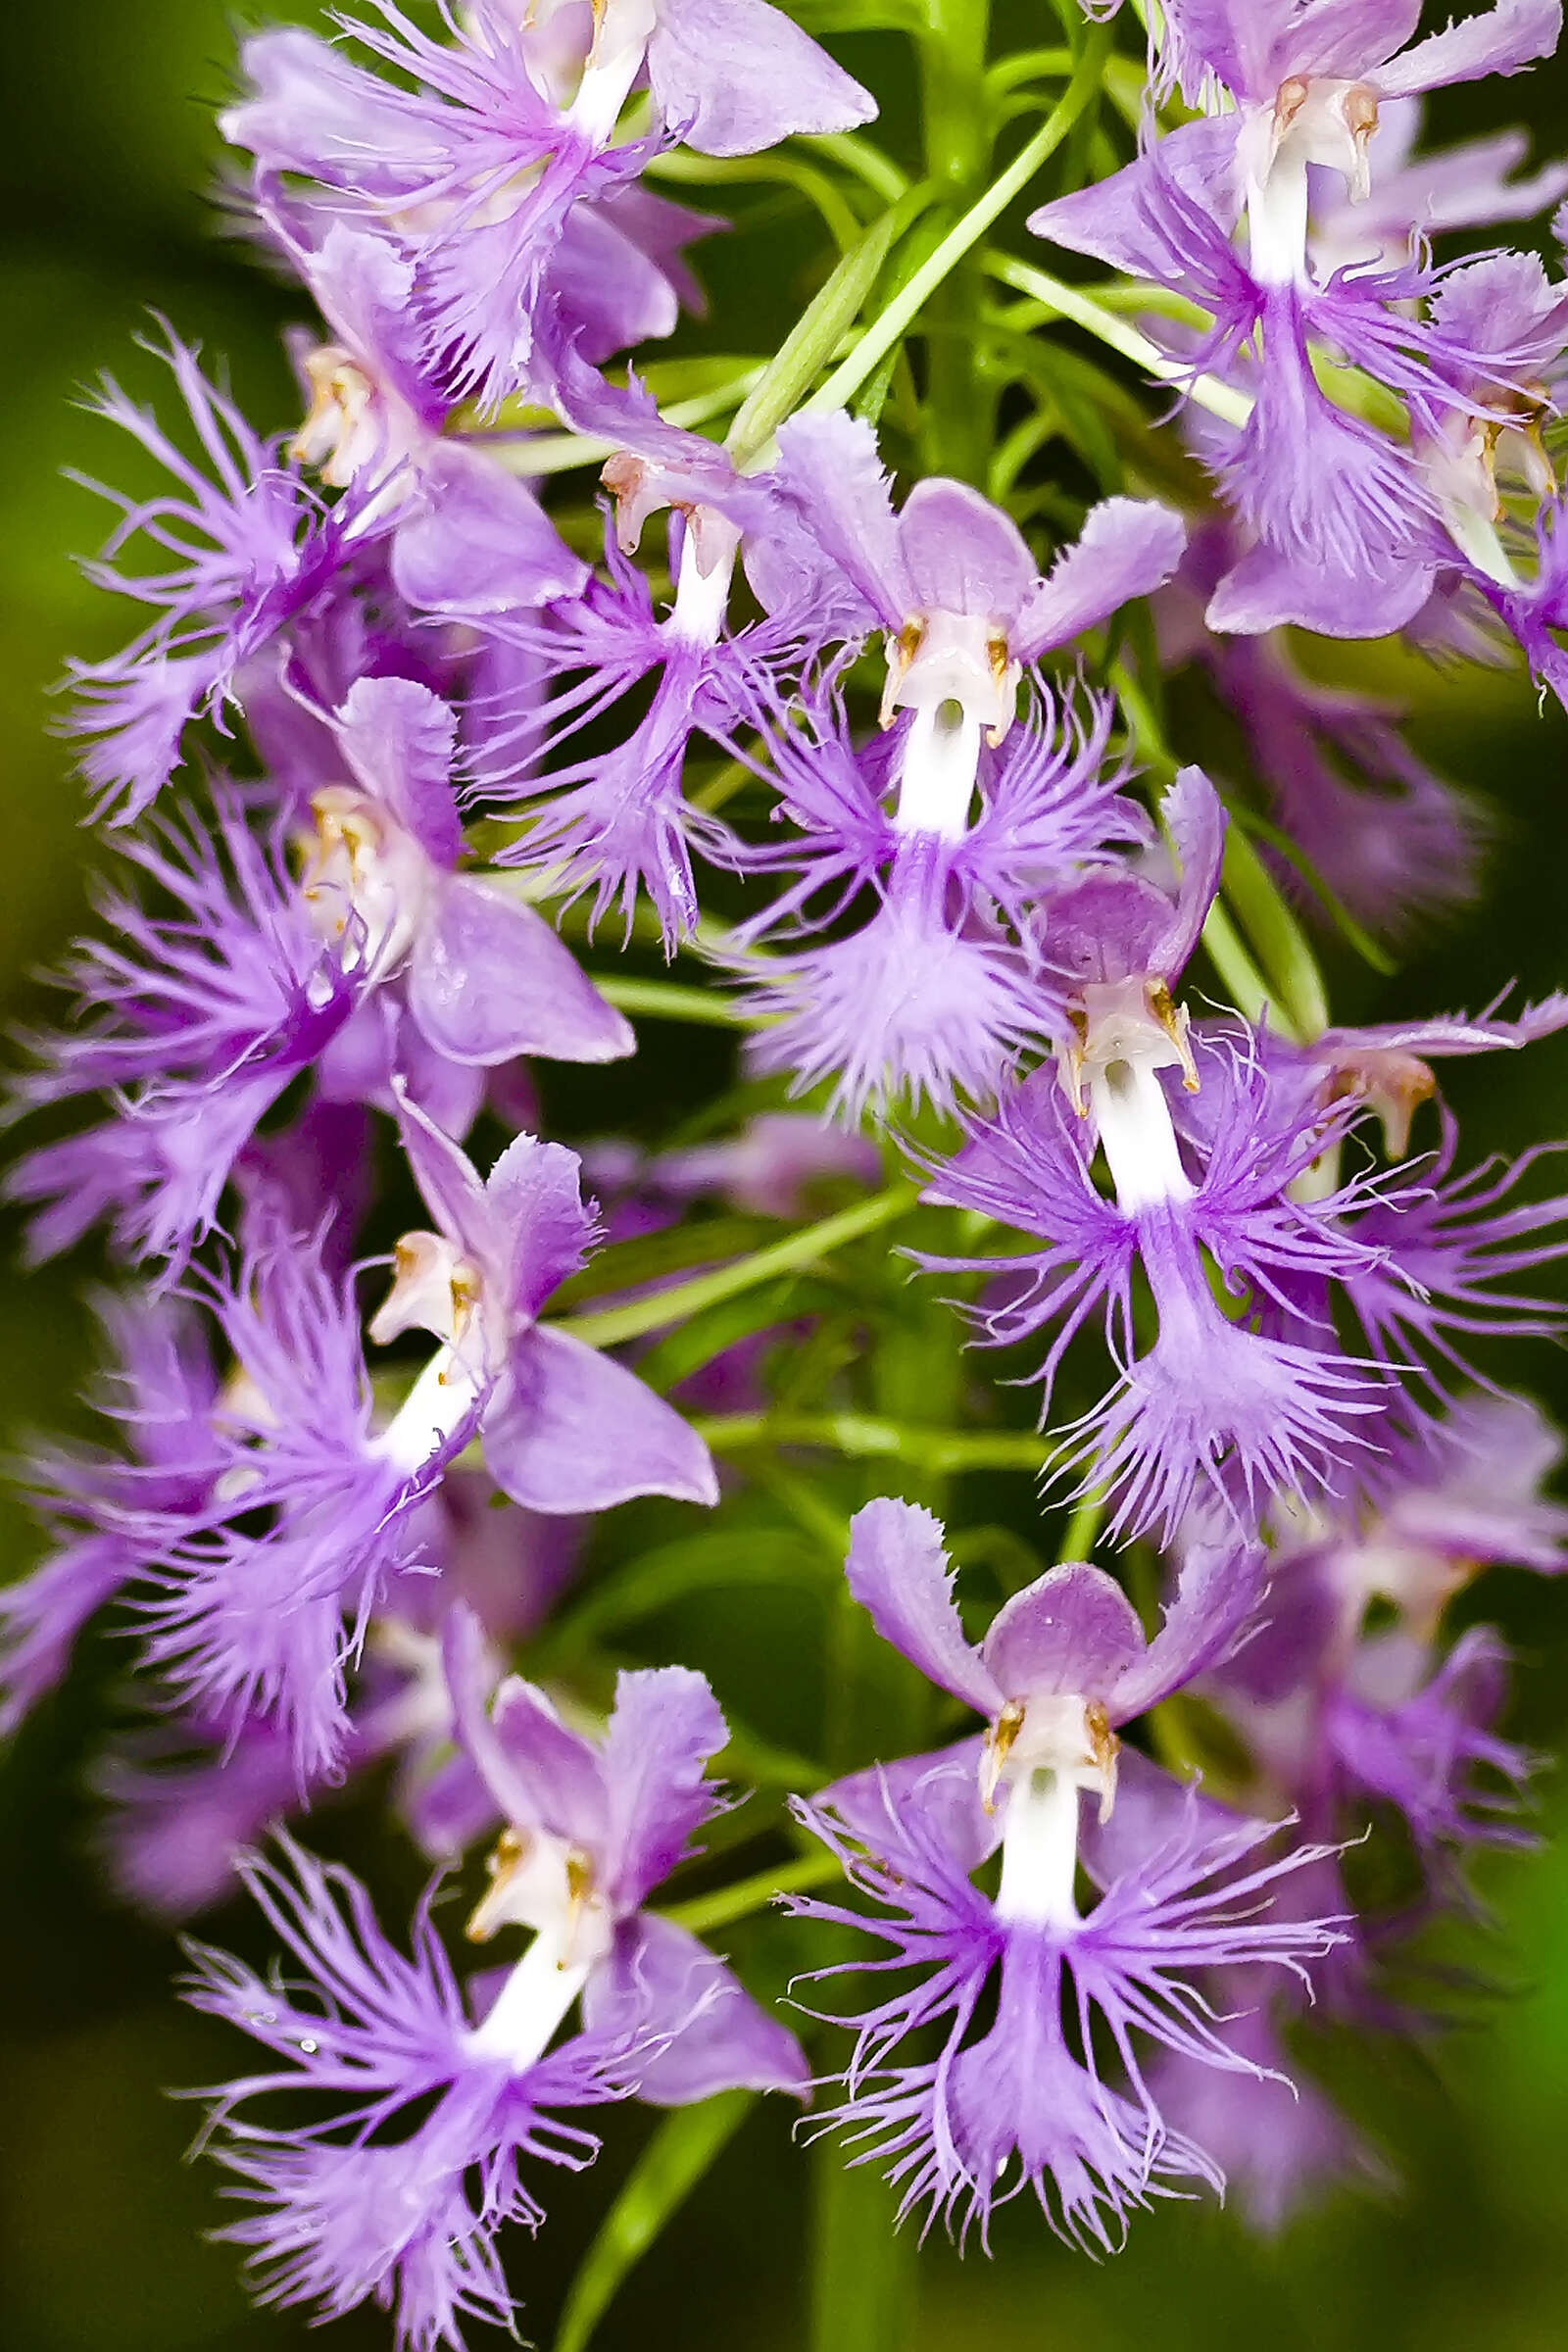 Image of Shriver's Fringed Orchid